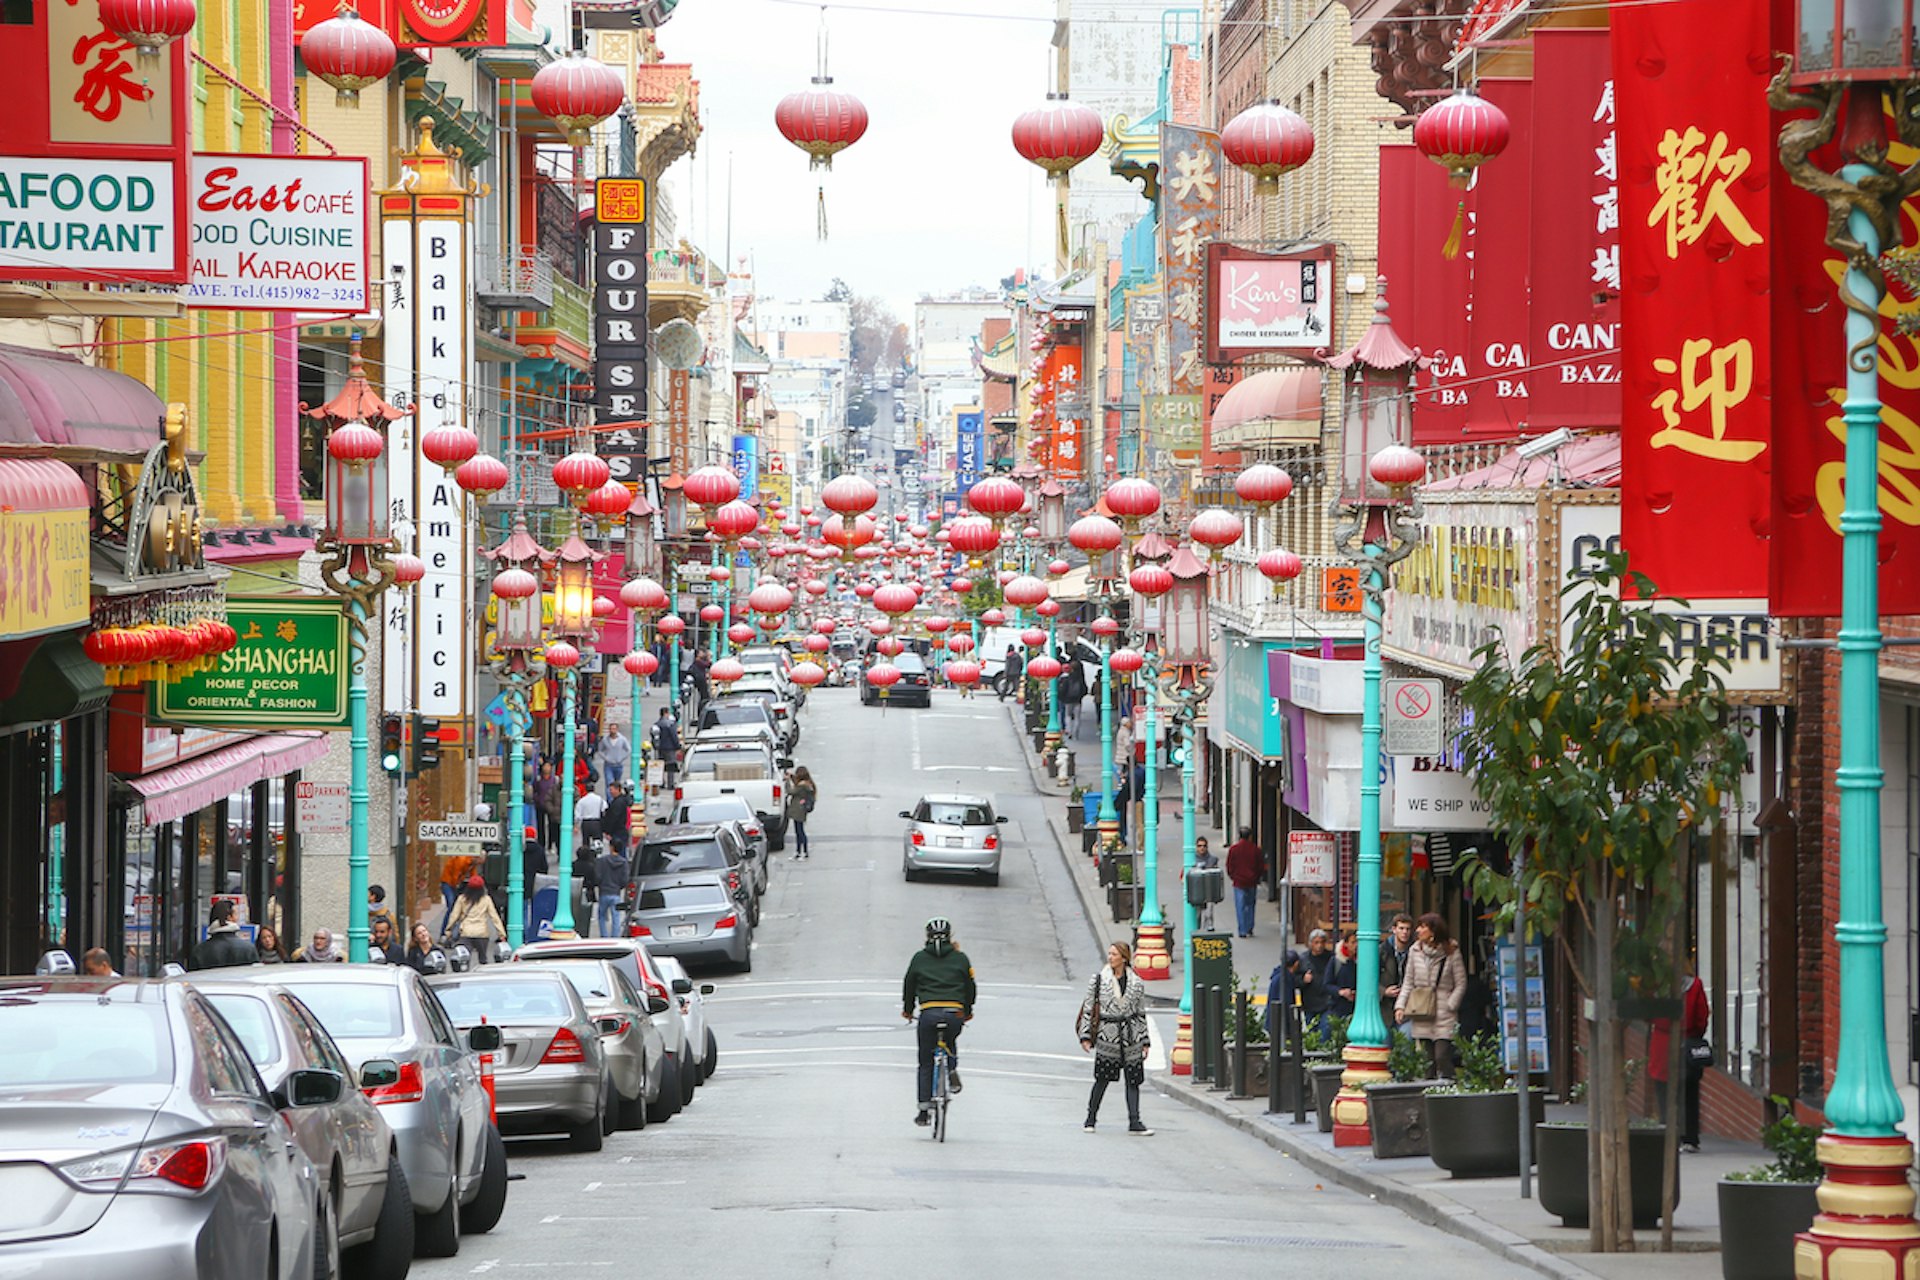 A man cycles down Grant Street, the main street in San Francisco's Chinatown. 